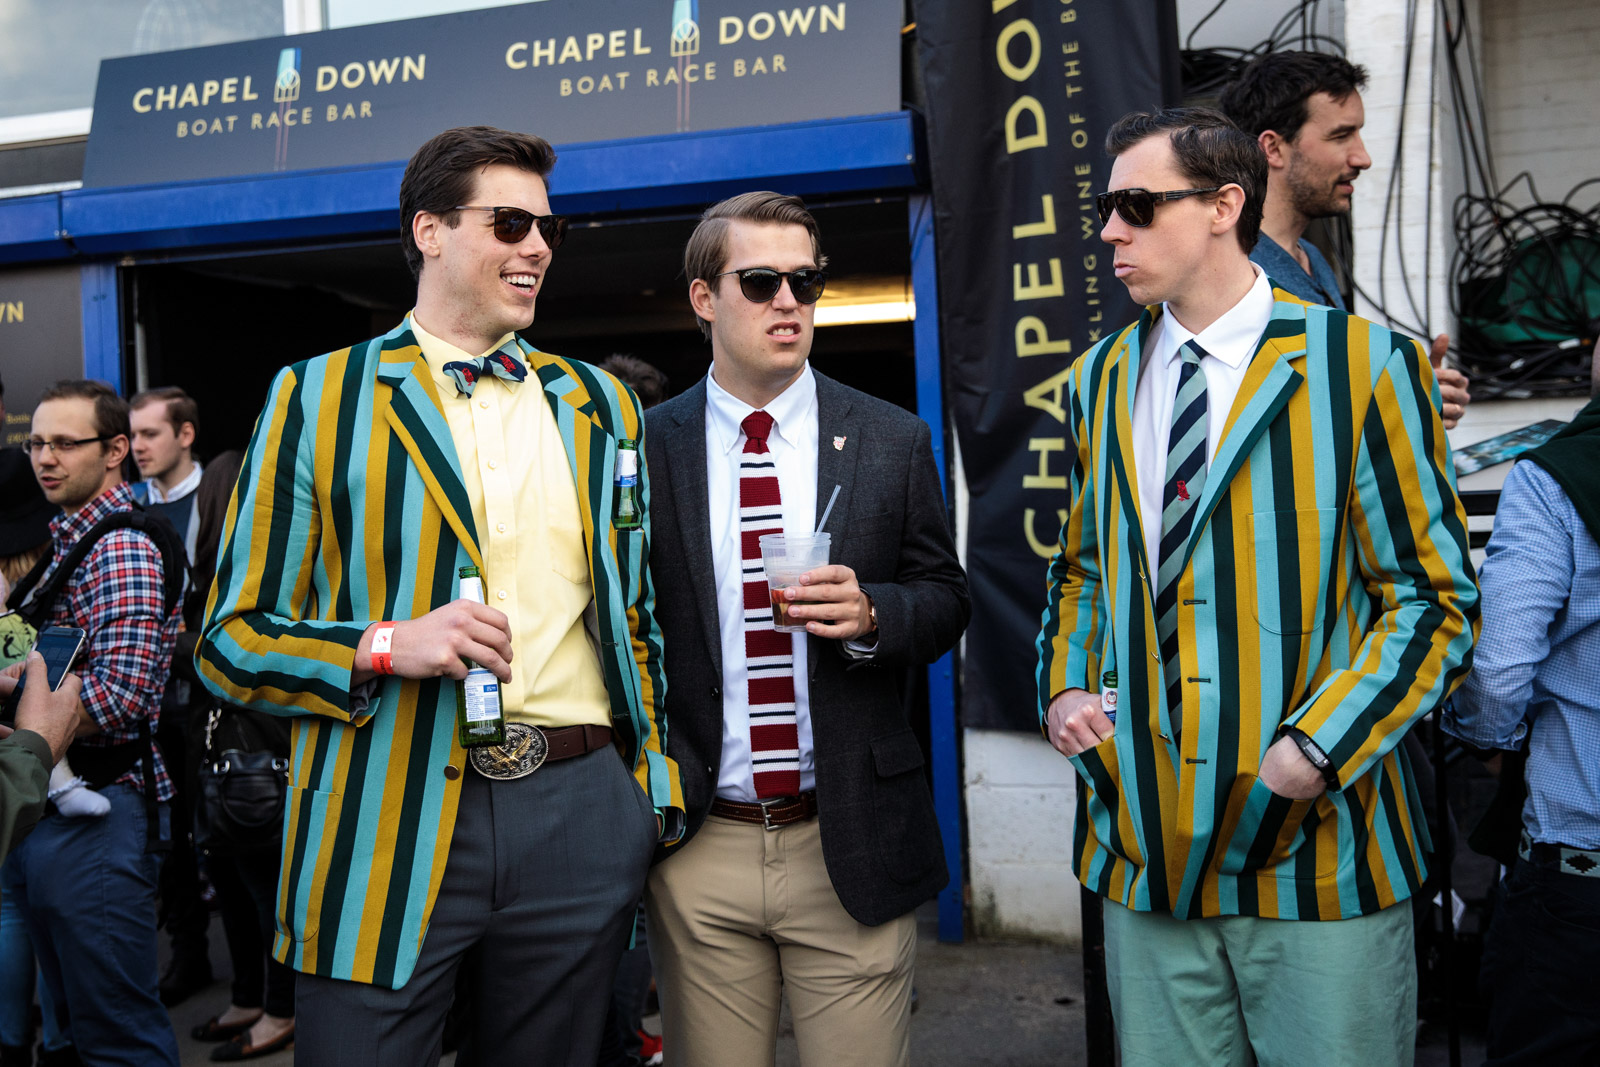  Spectators wearing boating blazers gather during the annual Boat Race between Oxford and Cambridge University along the River Thames in Putney on April 02, 2017 in London. 